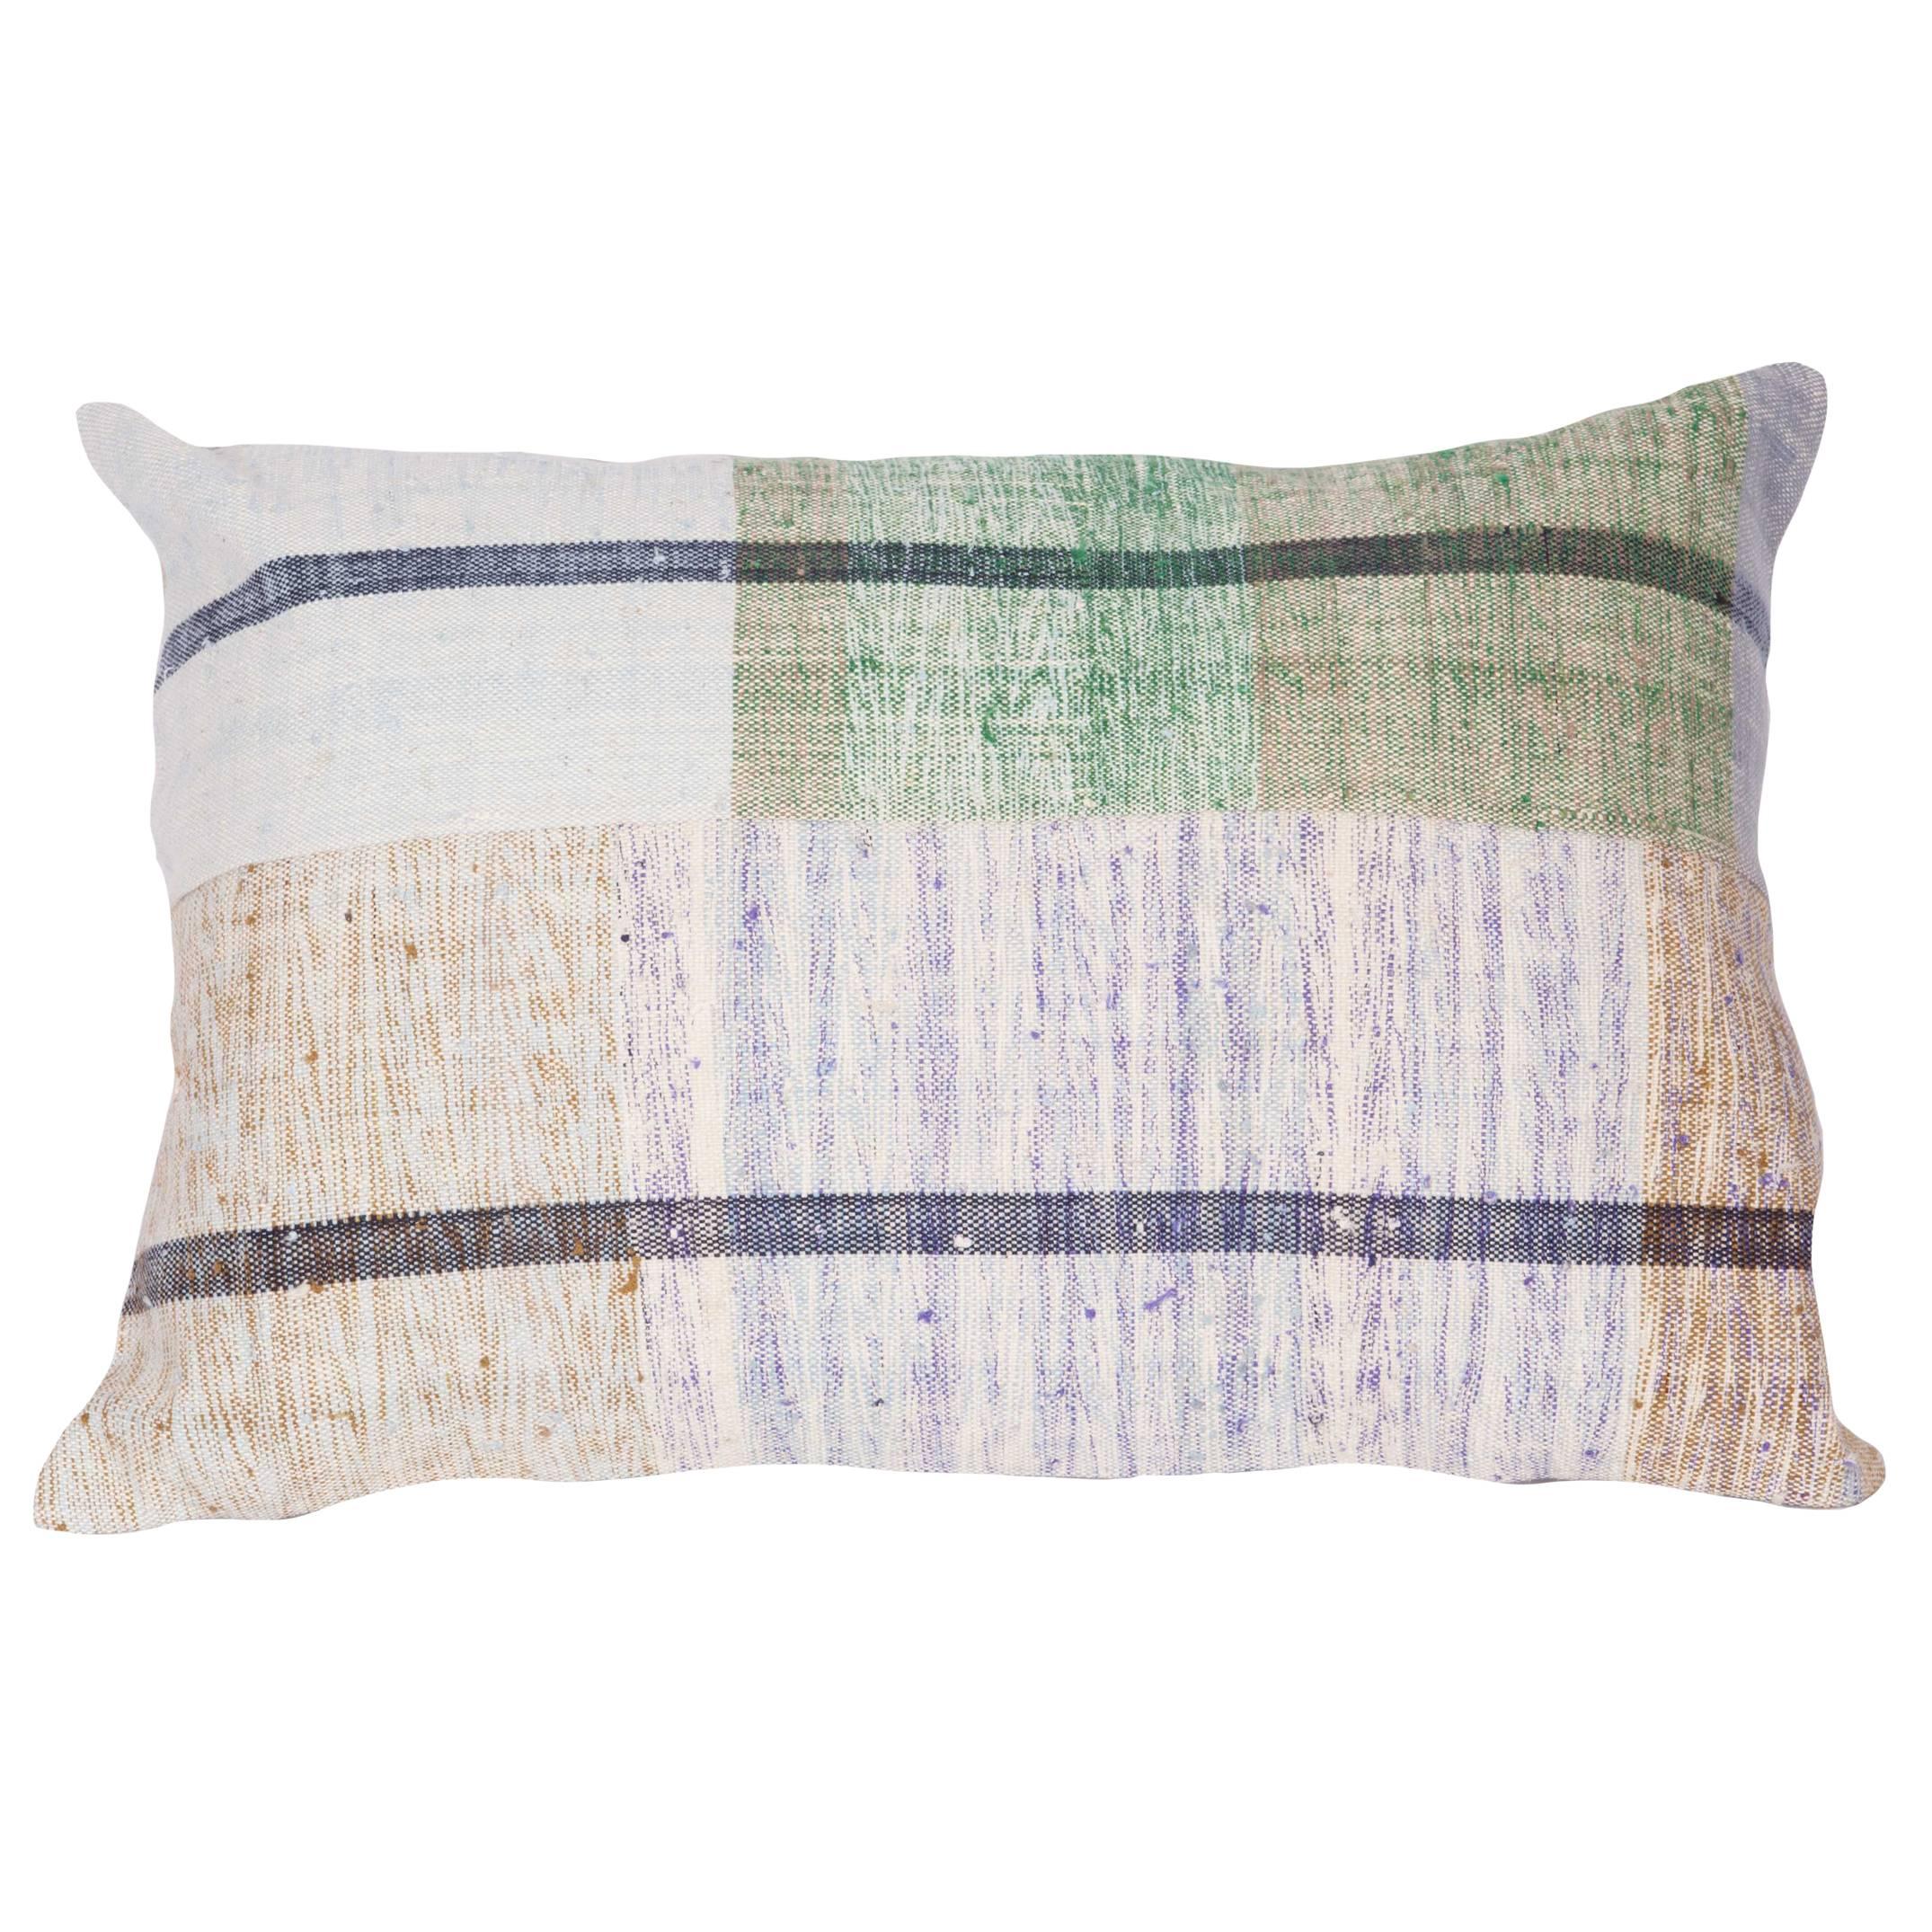 Pillow Made out of a Mid-20th Century Anatolian Cotton Kilim